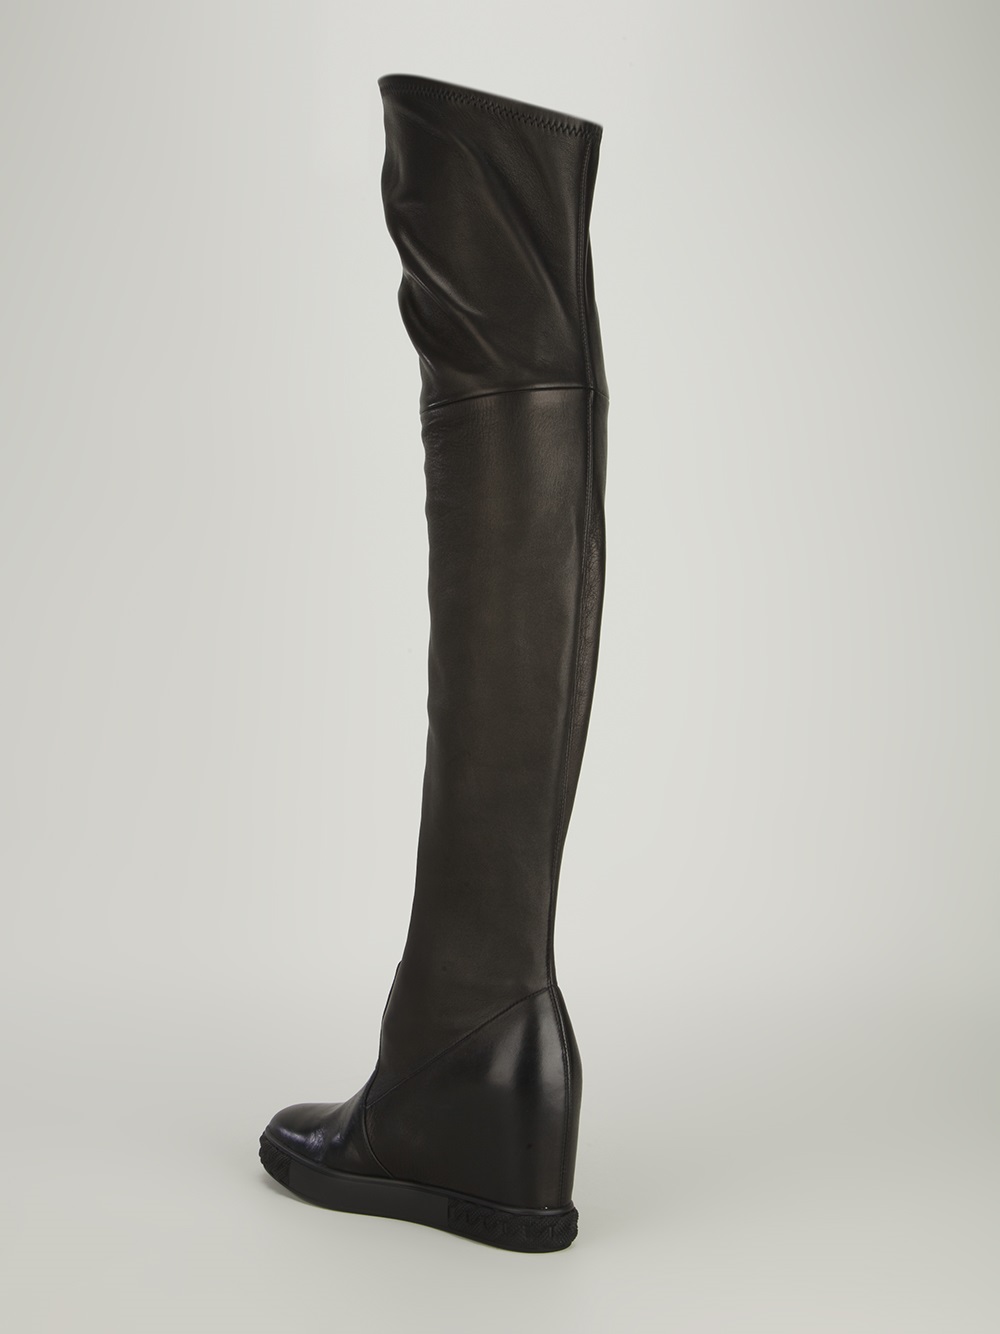 Lyst - Casadei Thigh-high Boots in Black